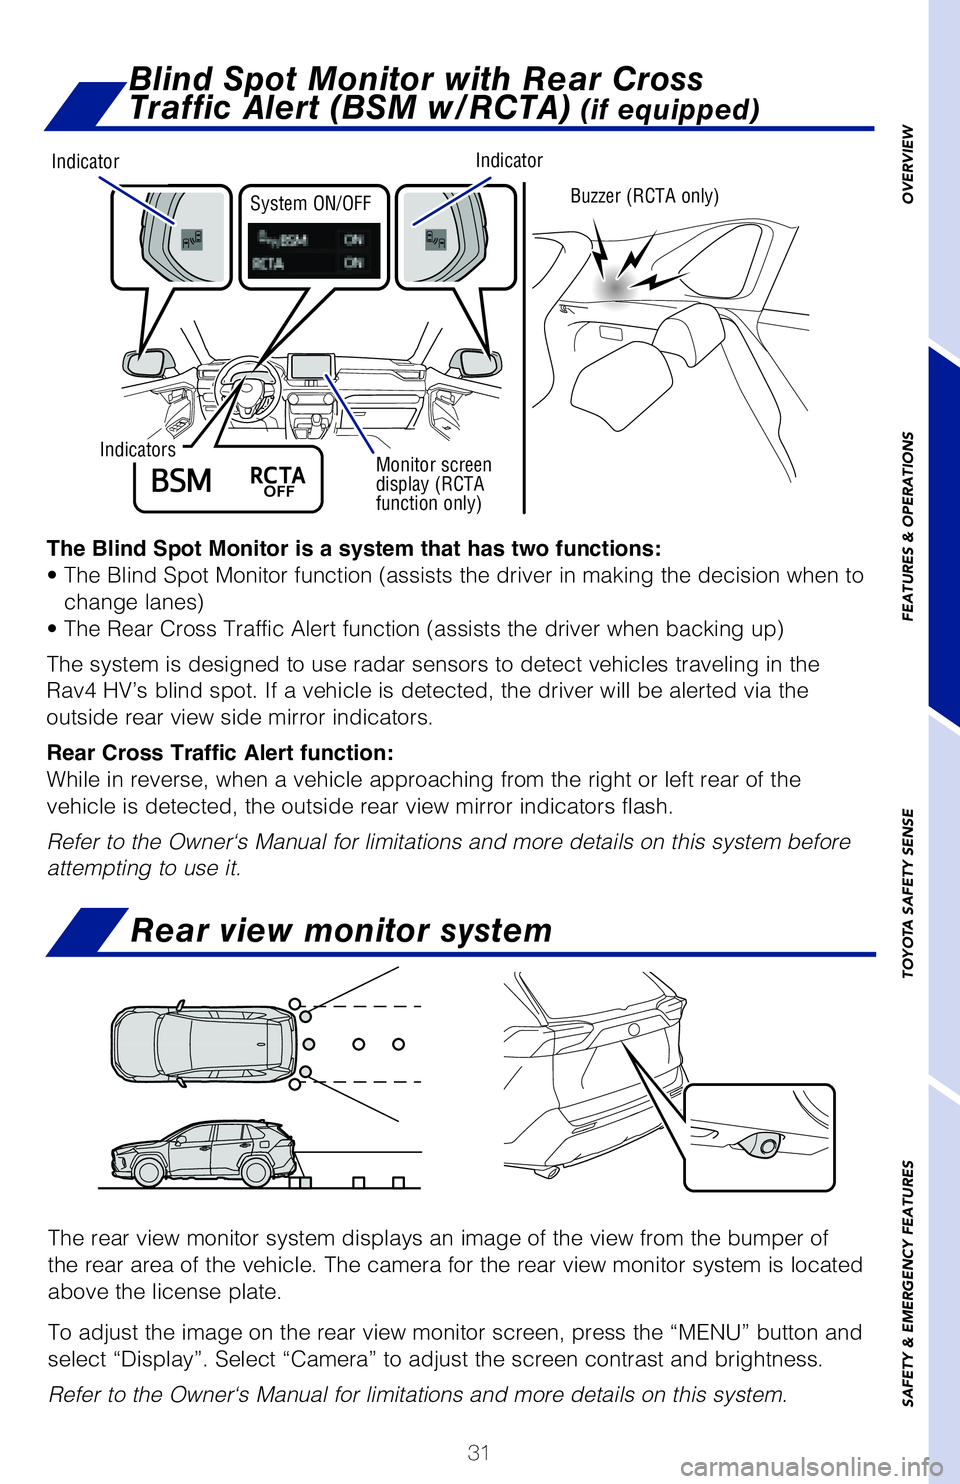 TOYOTA RAV4 HYBRID 2020  Owners Manual (in English) 31
OVERVIEW
FEATURES & OPERATIONS
TOYOTA SAFETY SENSE
SAFETY & EMERGENCY FEATURES
The Blind Spot Monitor is a system that has two functions:
�t��5�I�F��#�M�J�O�E��4�Q�P�U��.�P�O�J�U�P�S��G�V�O�D�